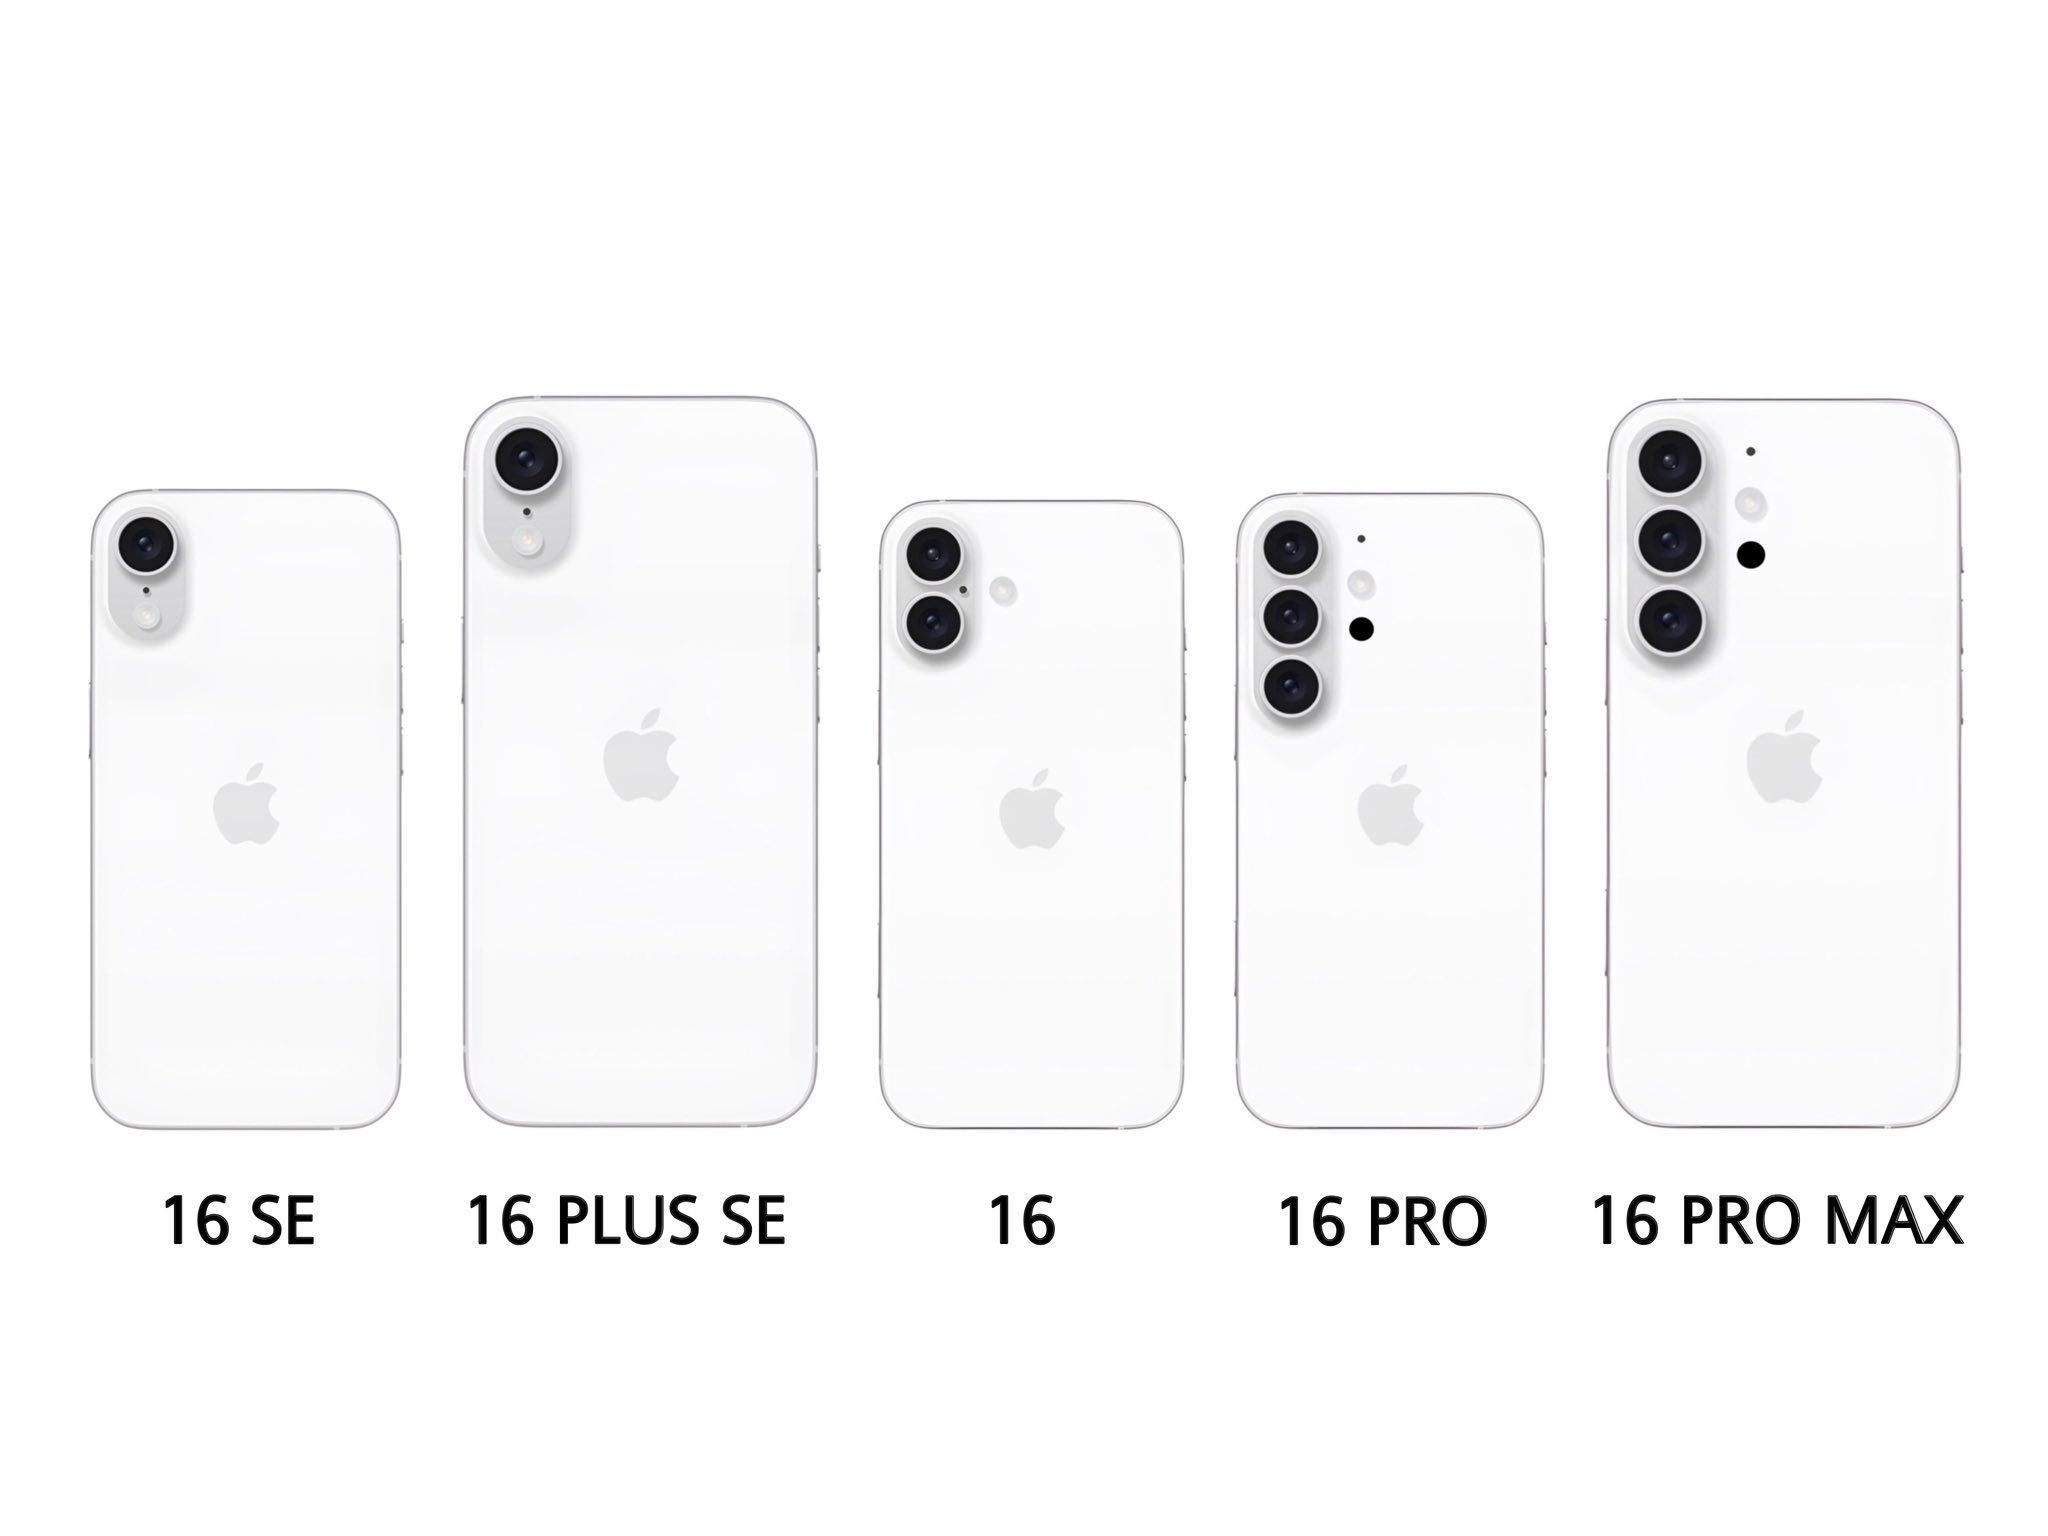 Early iPhone 16 leak hints at larger screens for the Pro and Pro Max models